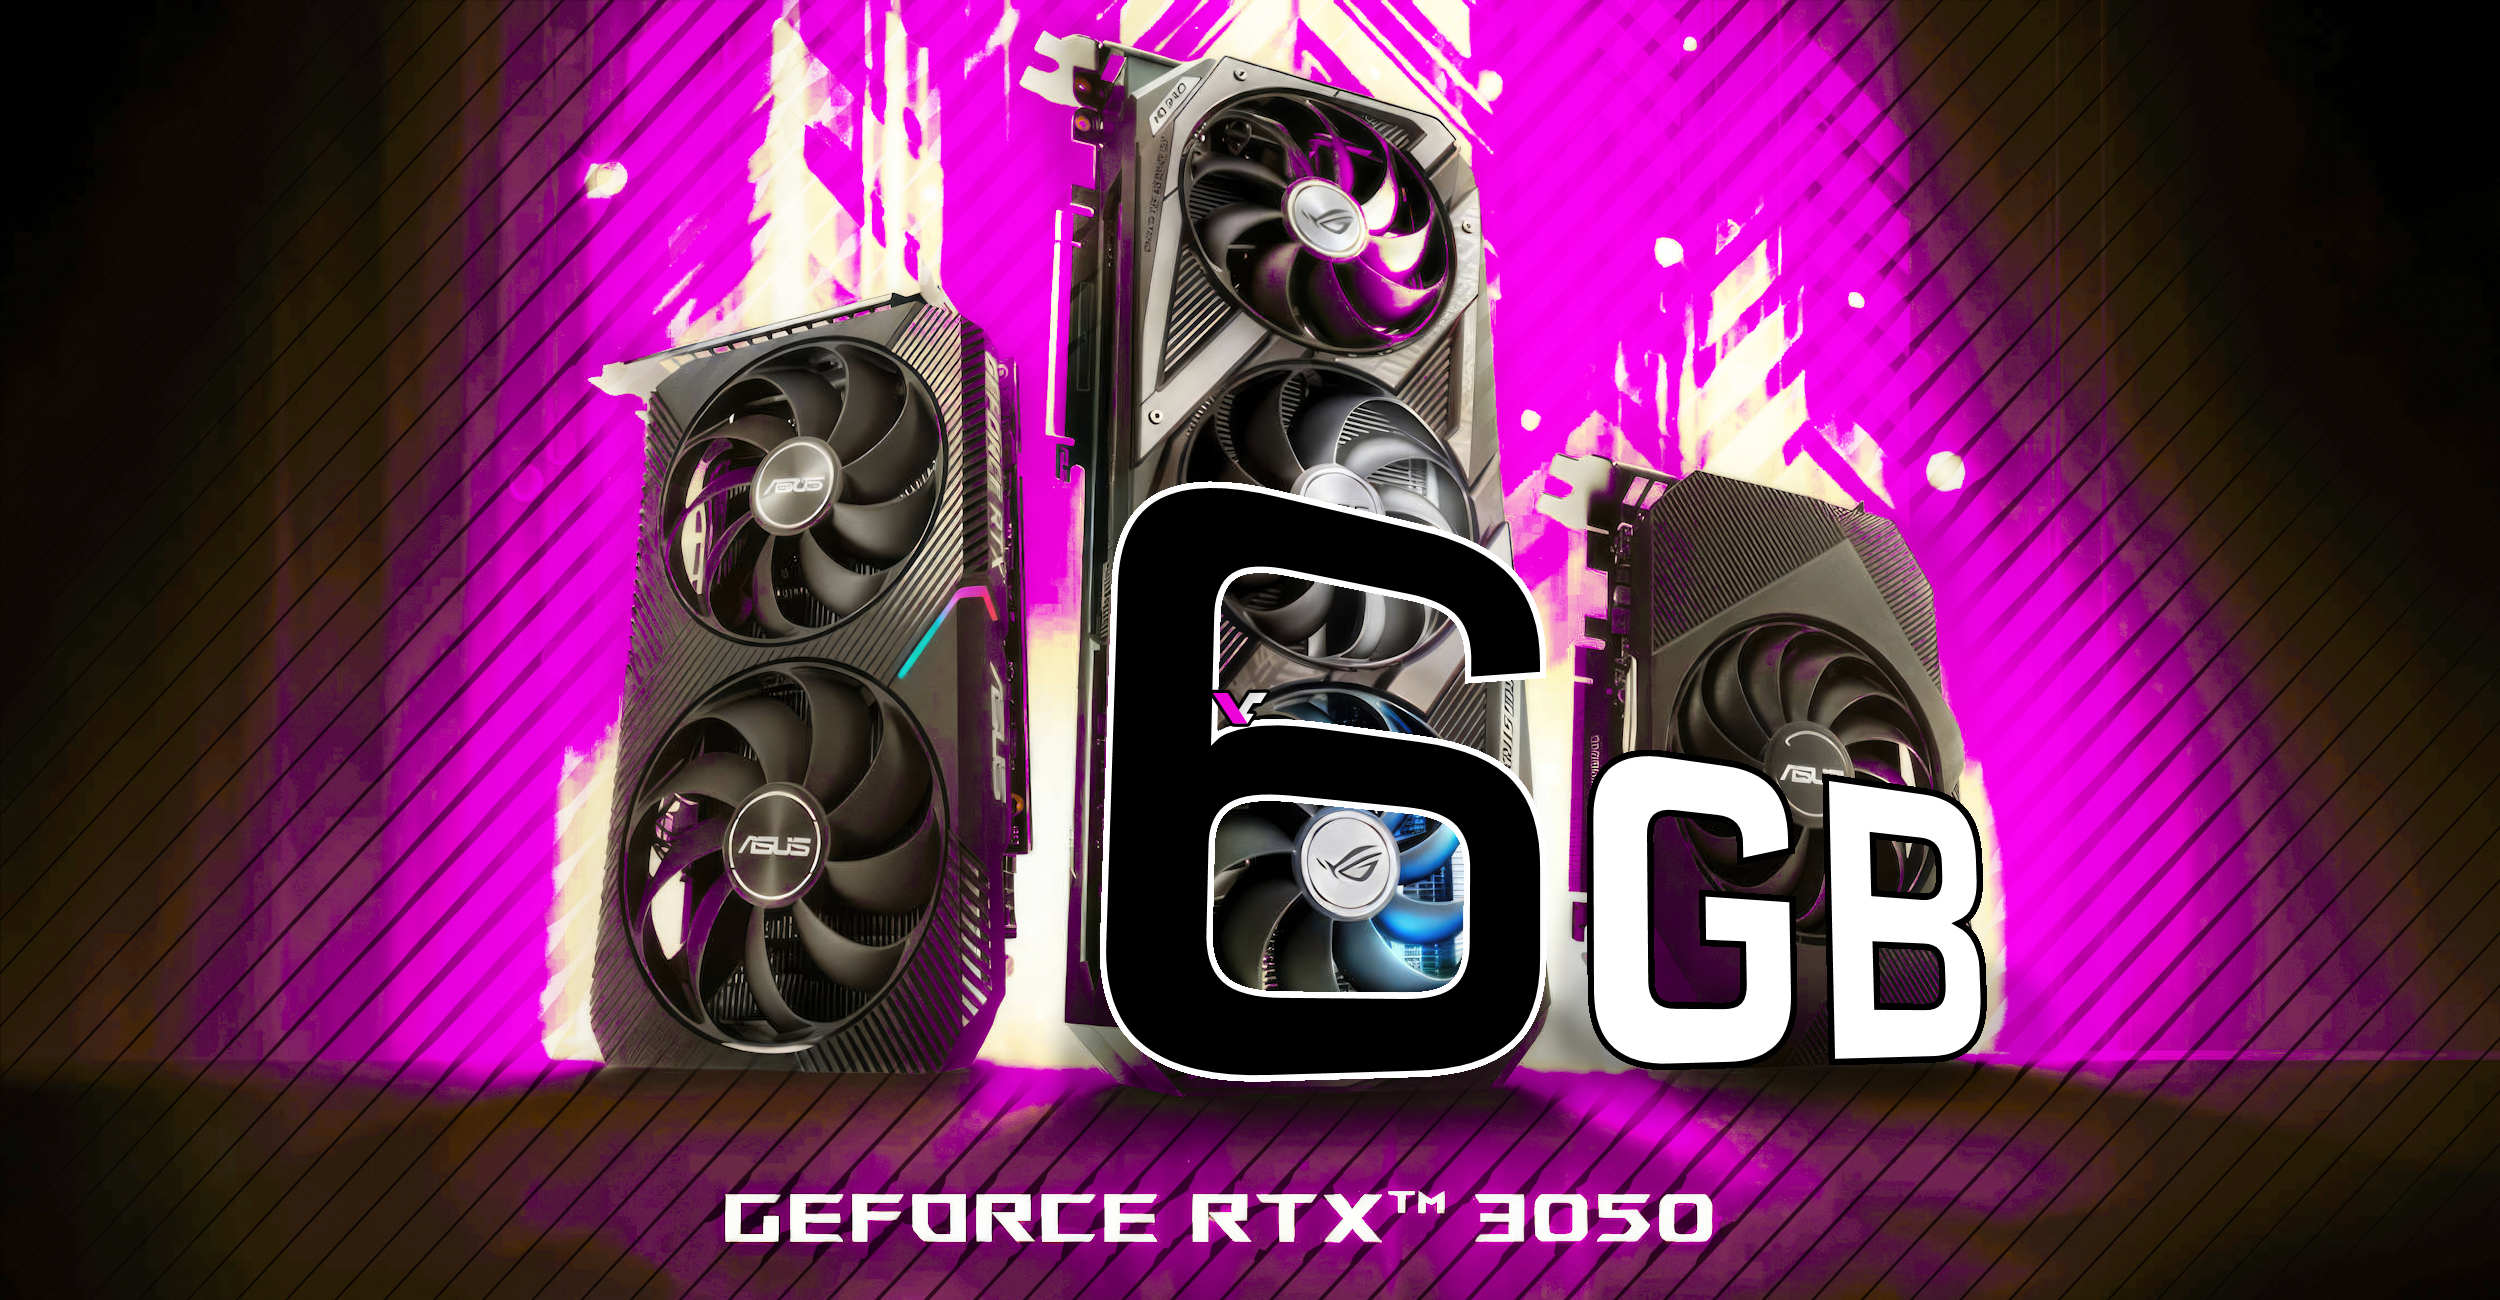 NVIDIA GeForce RTX 3050 6GB will have 2,304 CUDA cores and 70W TDP